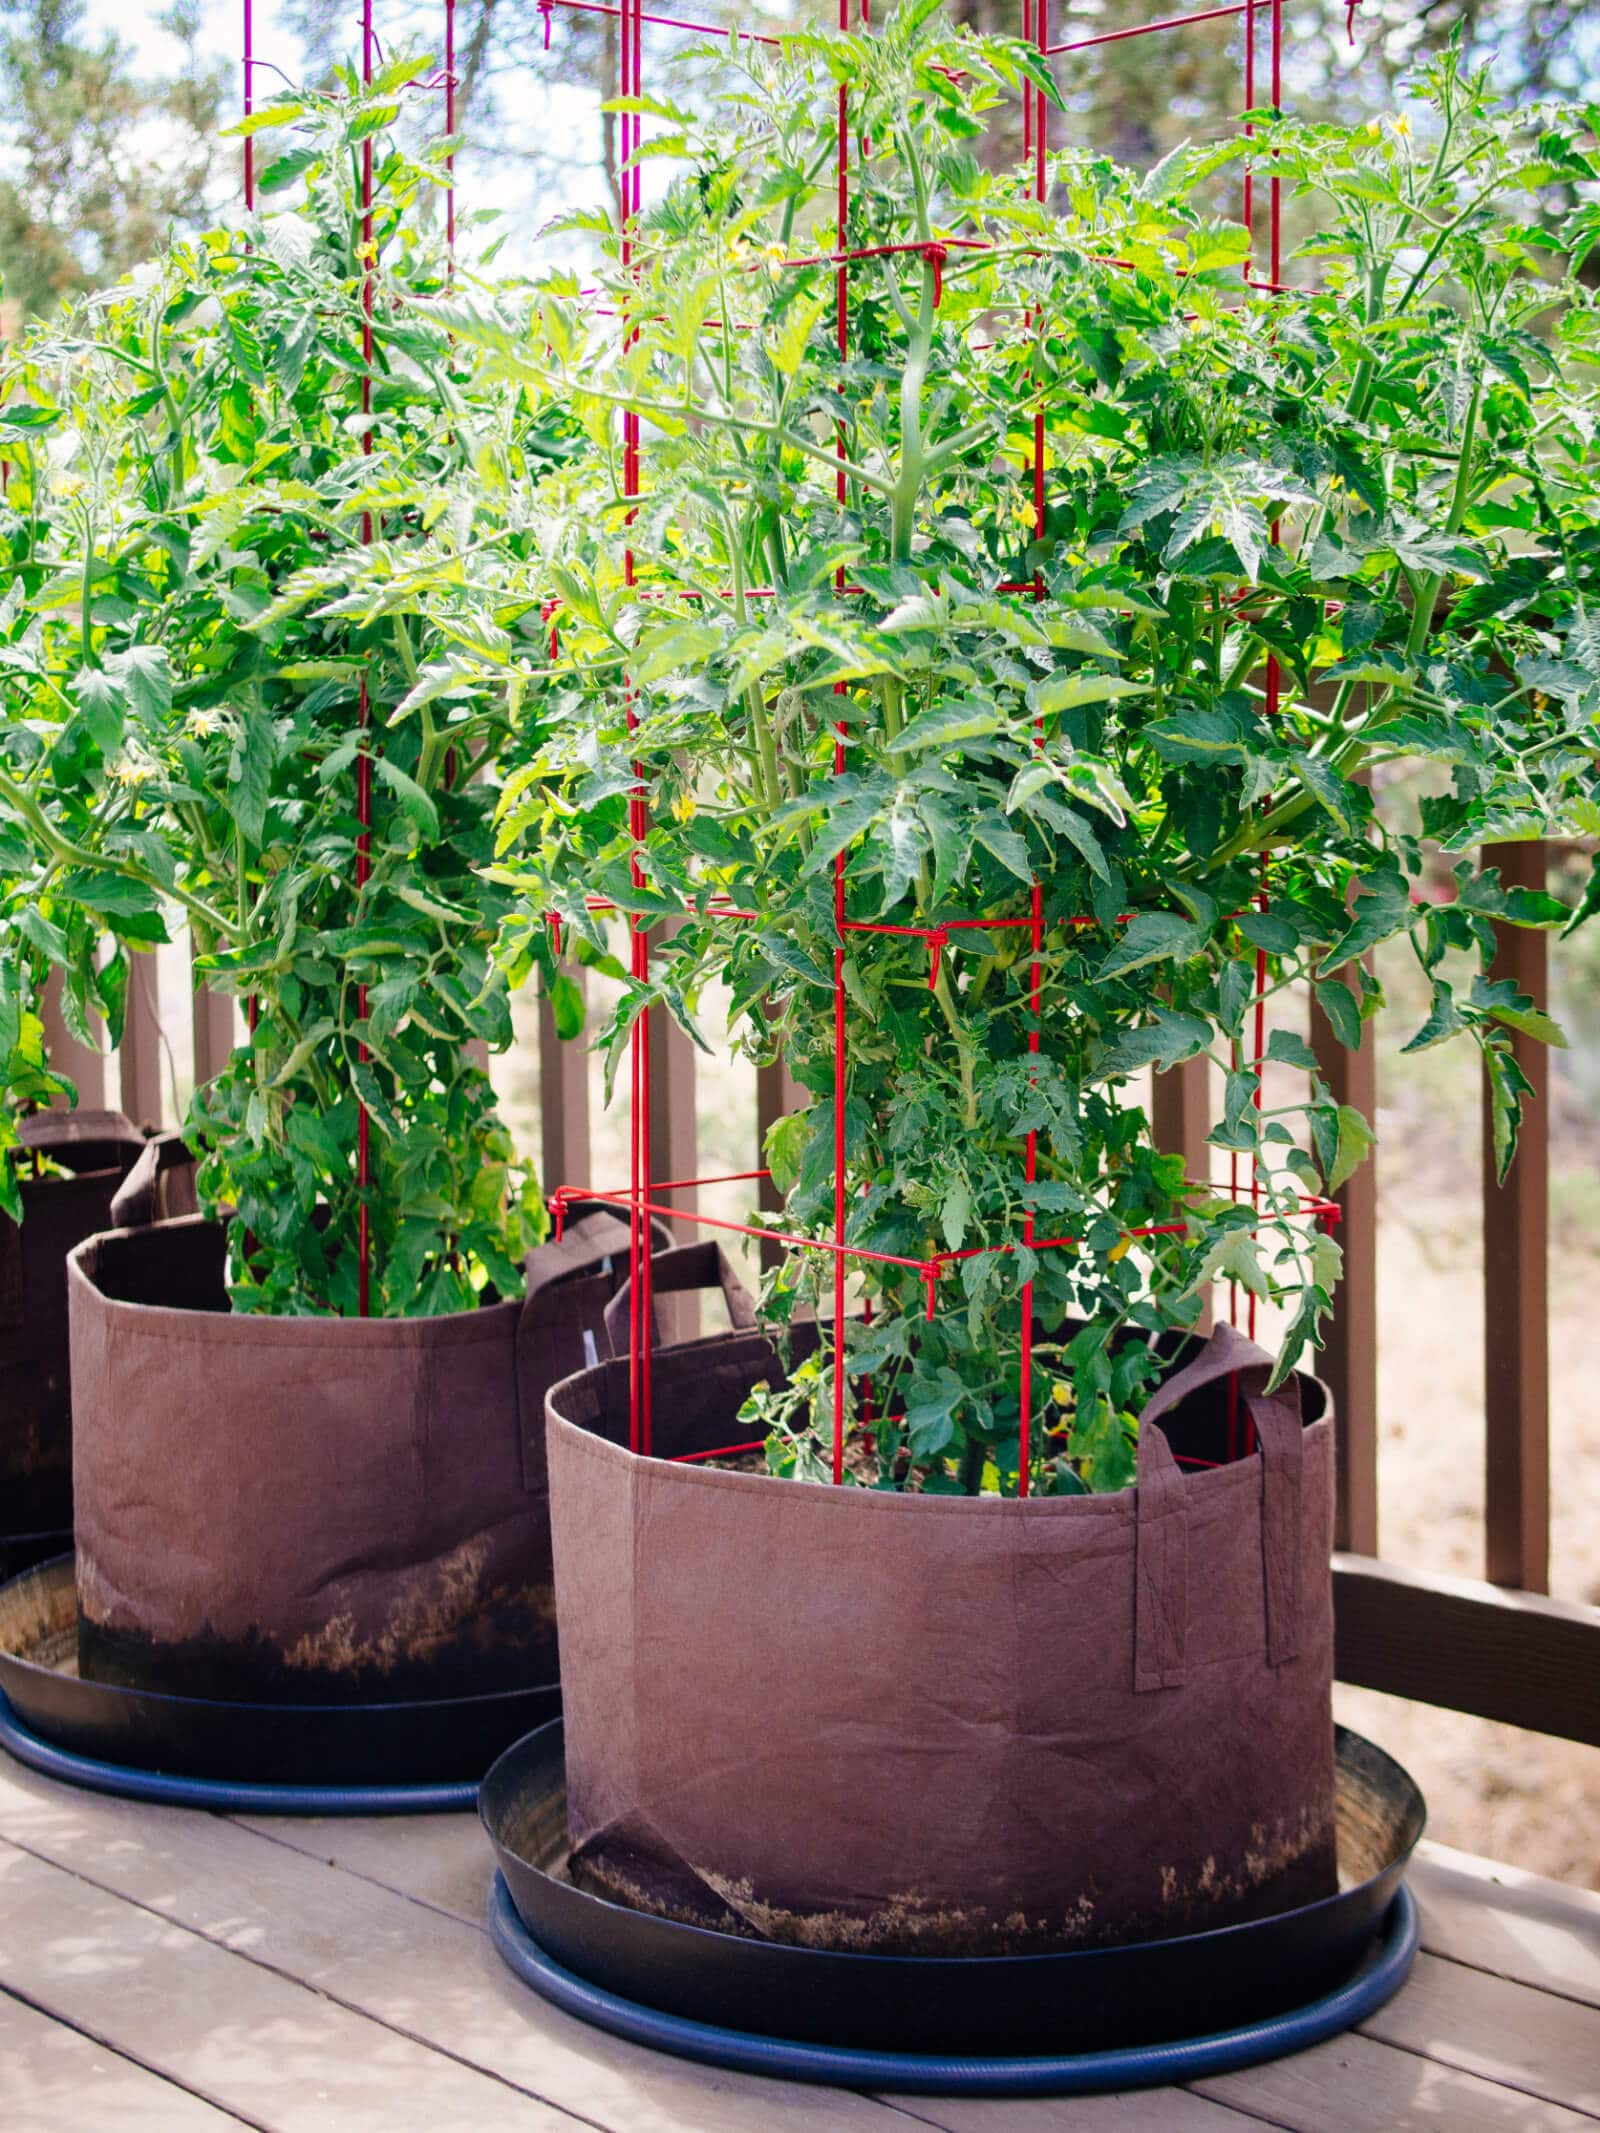 Growing indeterminate tomato plants in pots